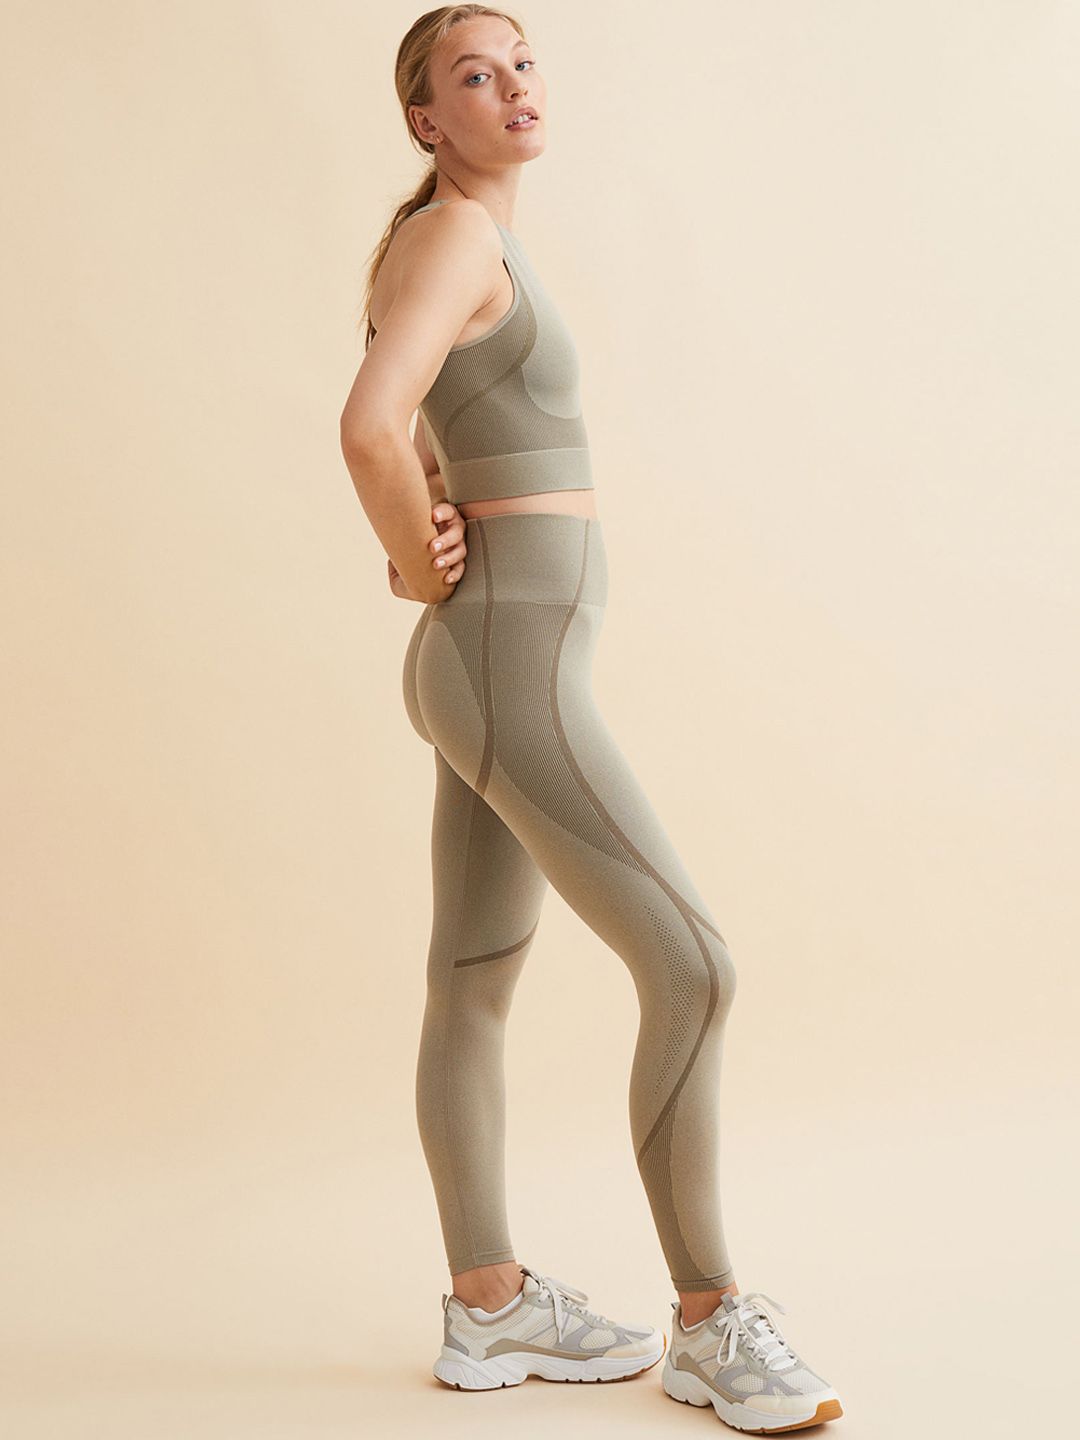 H&M Women Beige Seamless Sports Tights Price in India